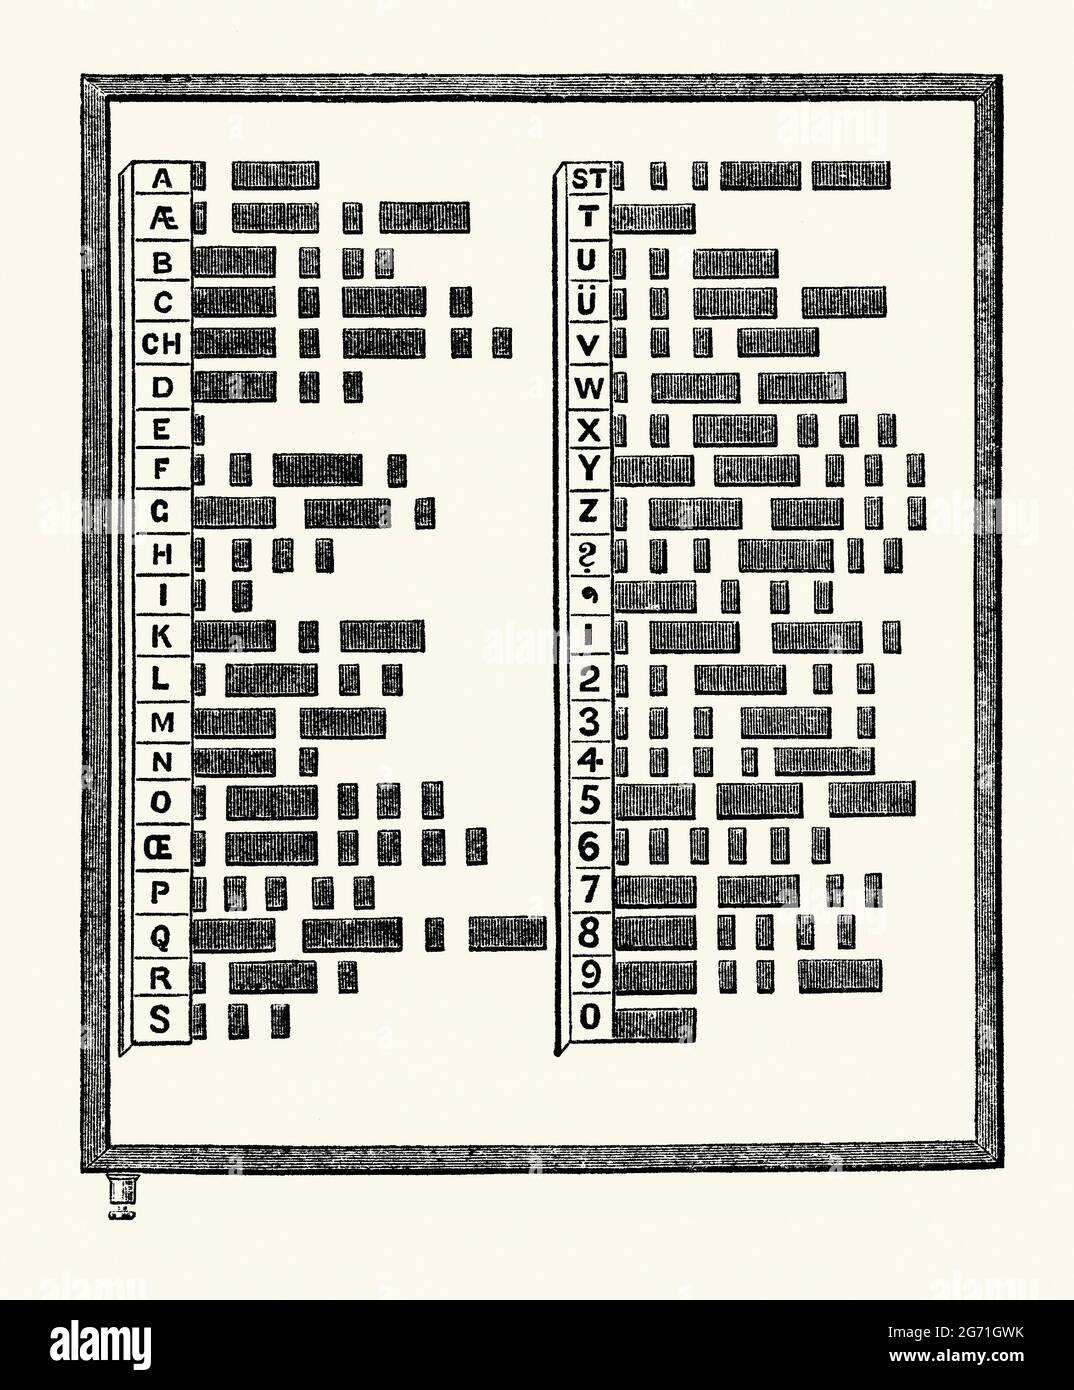 An old engraving of a Morse transmitting plate from the Victorian era. It is from a book of the 1890s on discoveries and inventions during the 1800s. Morse code is a method used in telecommunication to encode text characters as sequences of two different signal durations called dots and dashes (dits and dahs). The code is named after American Samuel Morse, one of the inventors of the telegraph. It was first used in the 1840s. International Morse Code (Continental Morse Code) of 1865 encodes the 26 alphabet letters, one non-Latin letter, numerals, punctuation and procedural signals (prosigns). Stock Photo